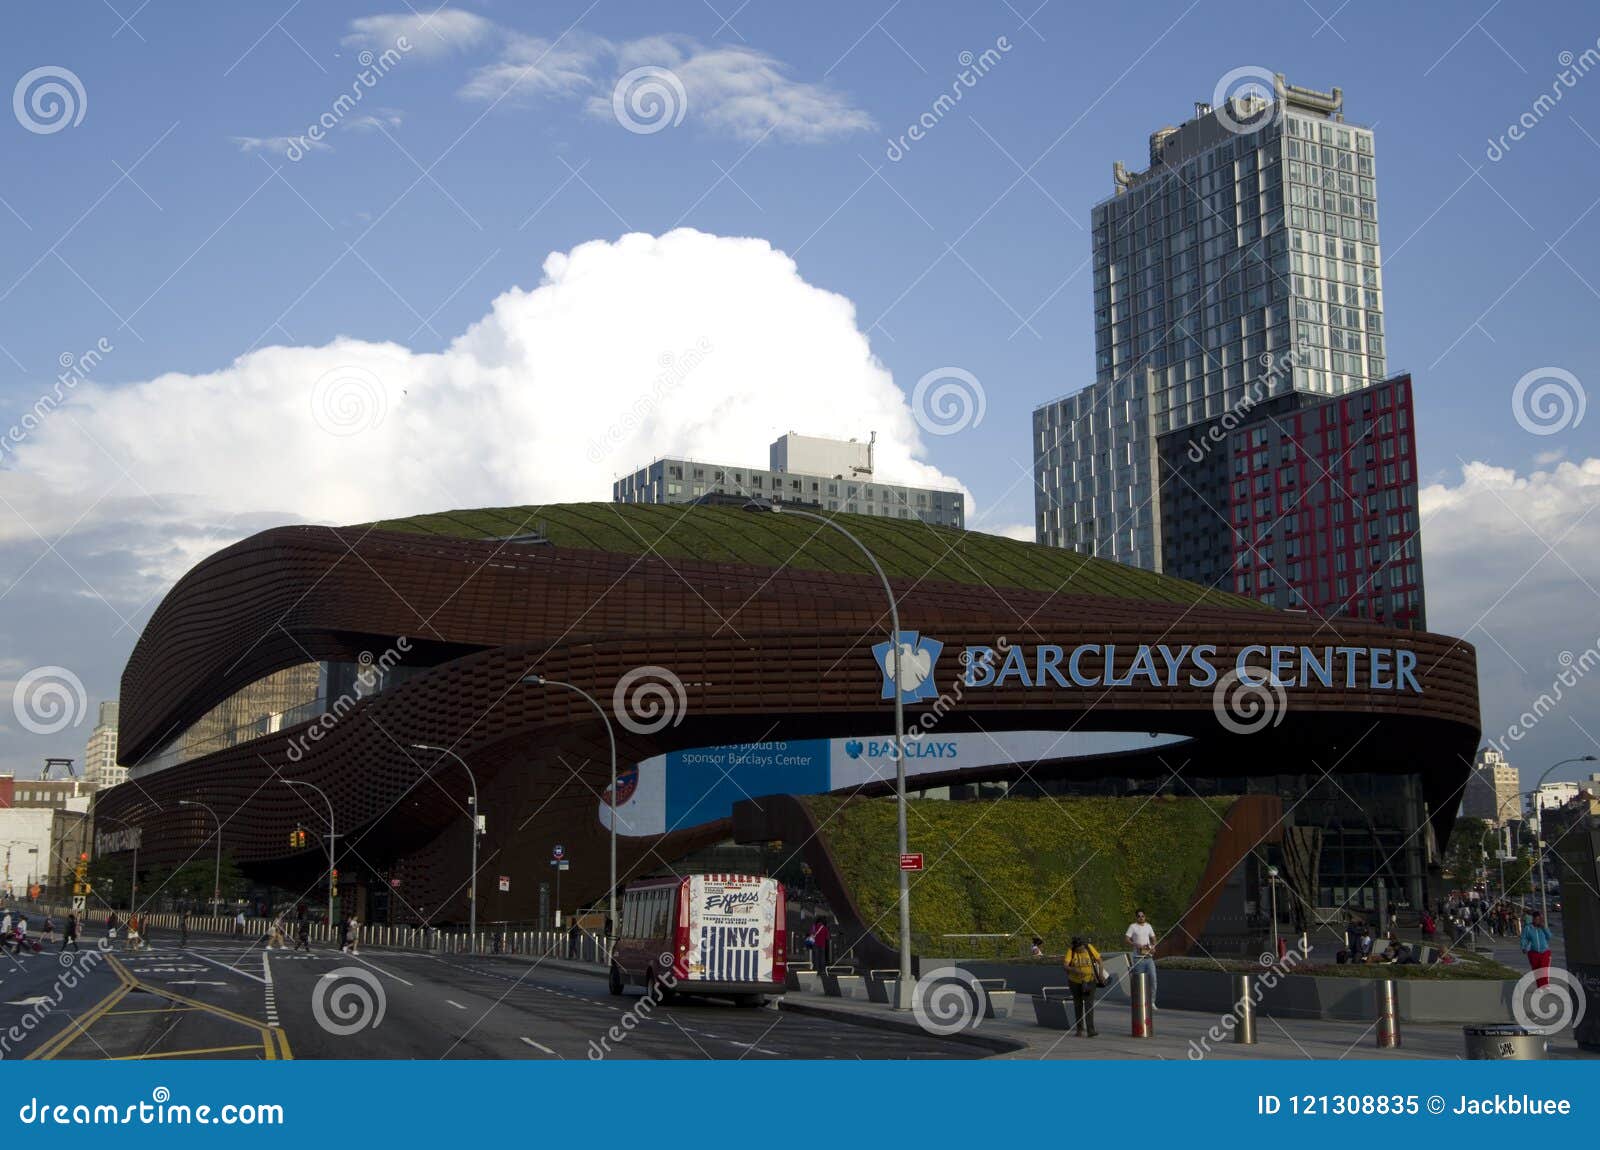 Brooklyn barclays center arena hi-res stock photography and images - Alamy